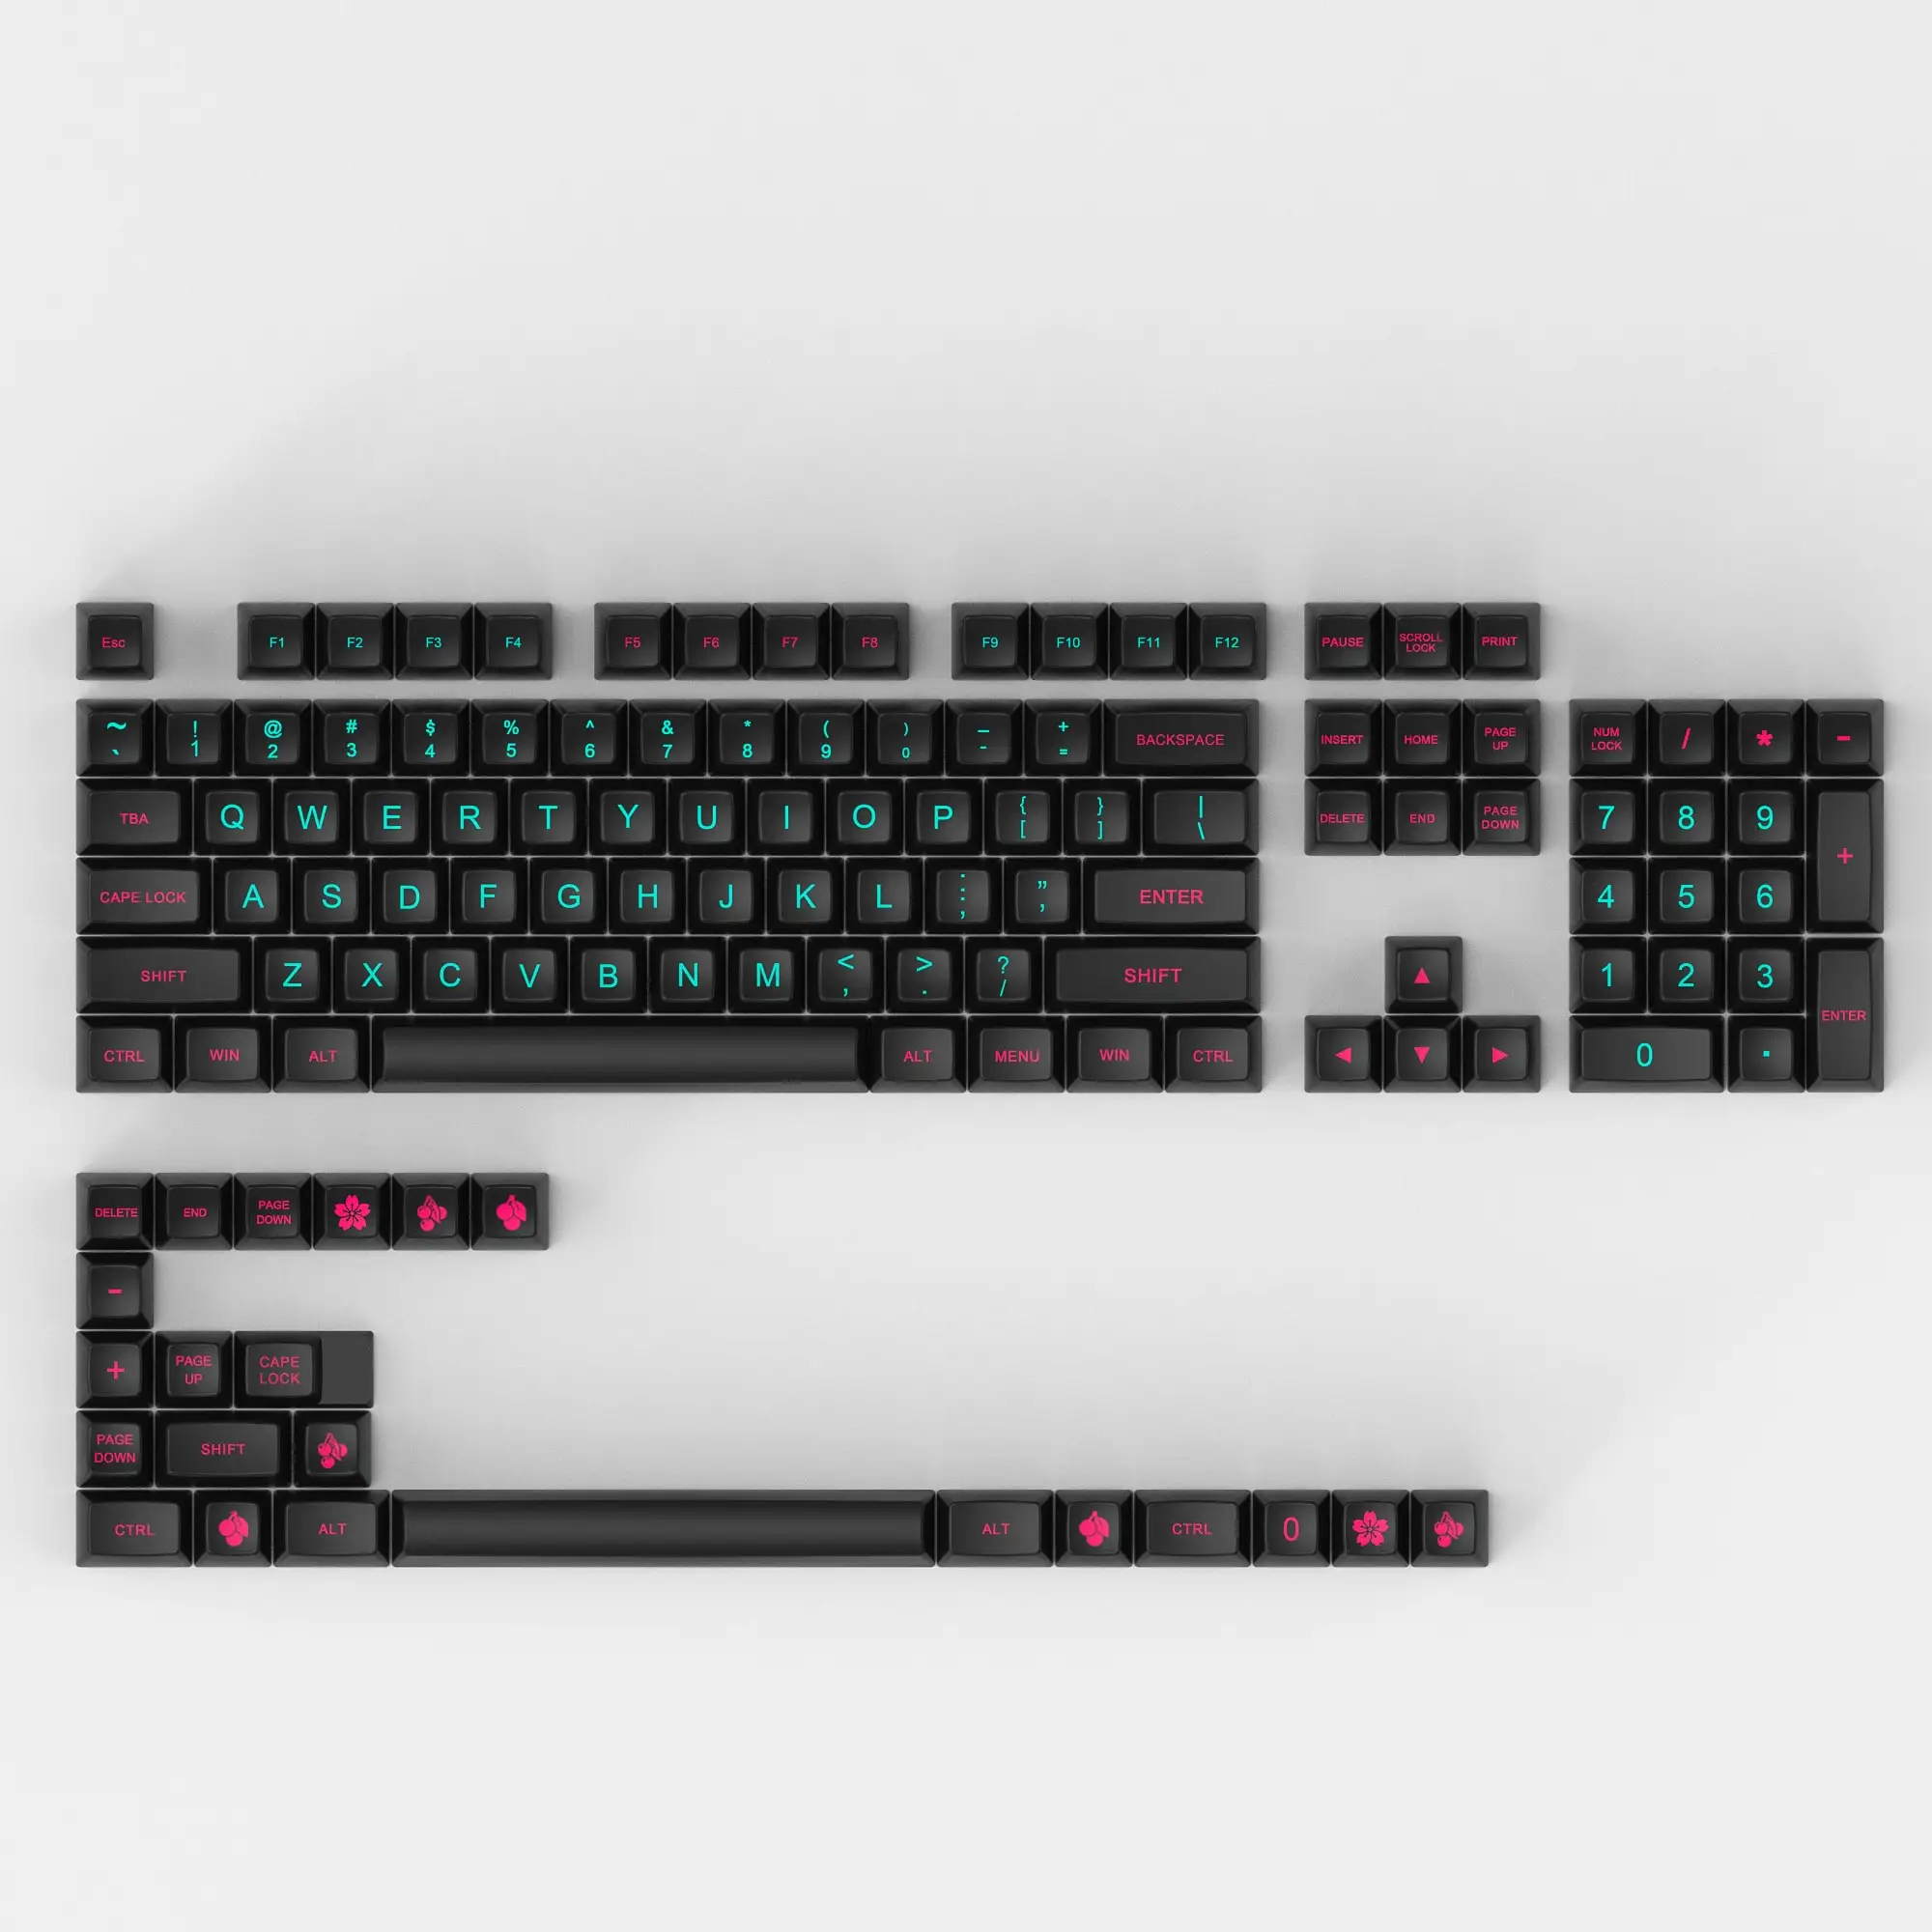 Maxkey SA Miami night key cap ABS 127 key is suitable for most mechanical keyboards - Pudding Keycap